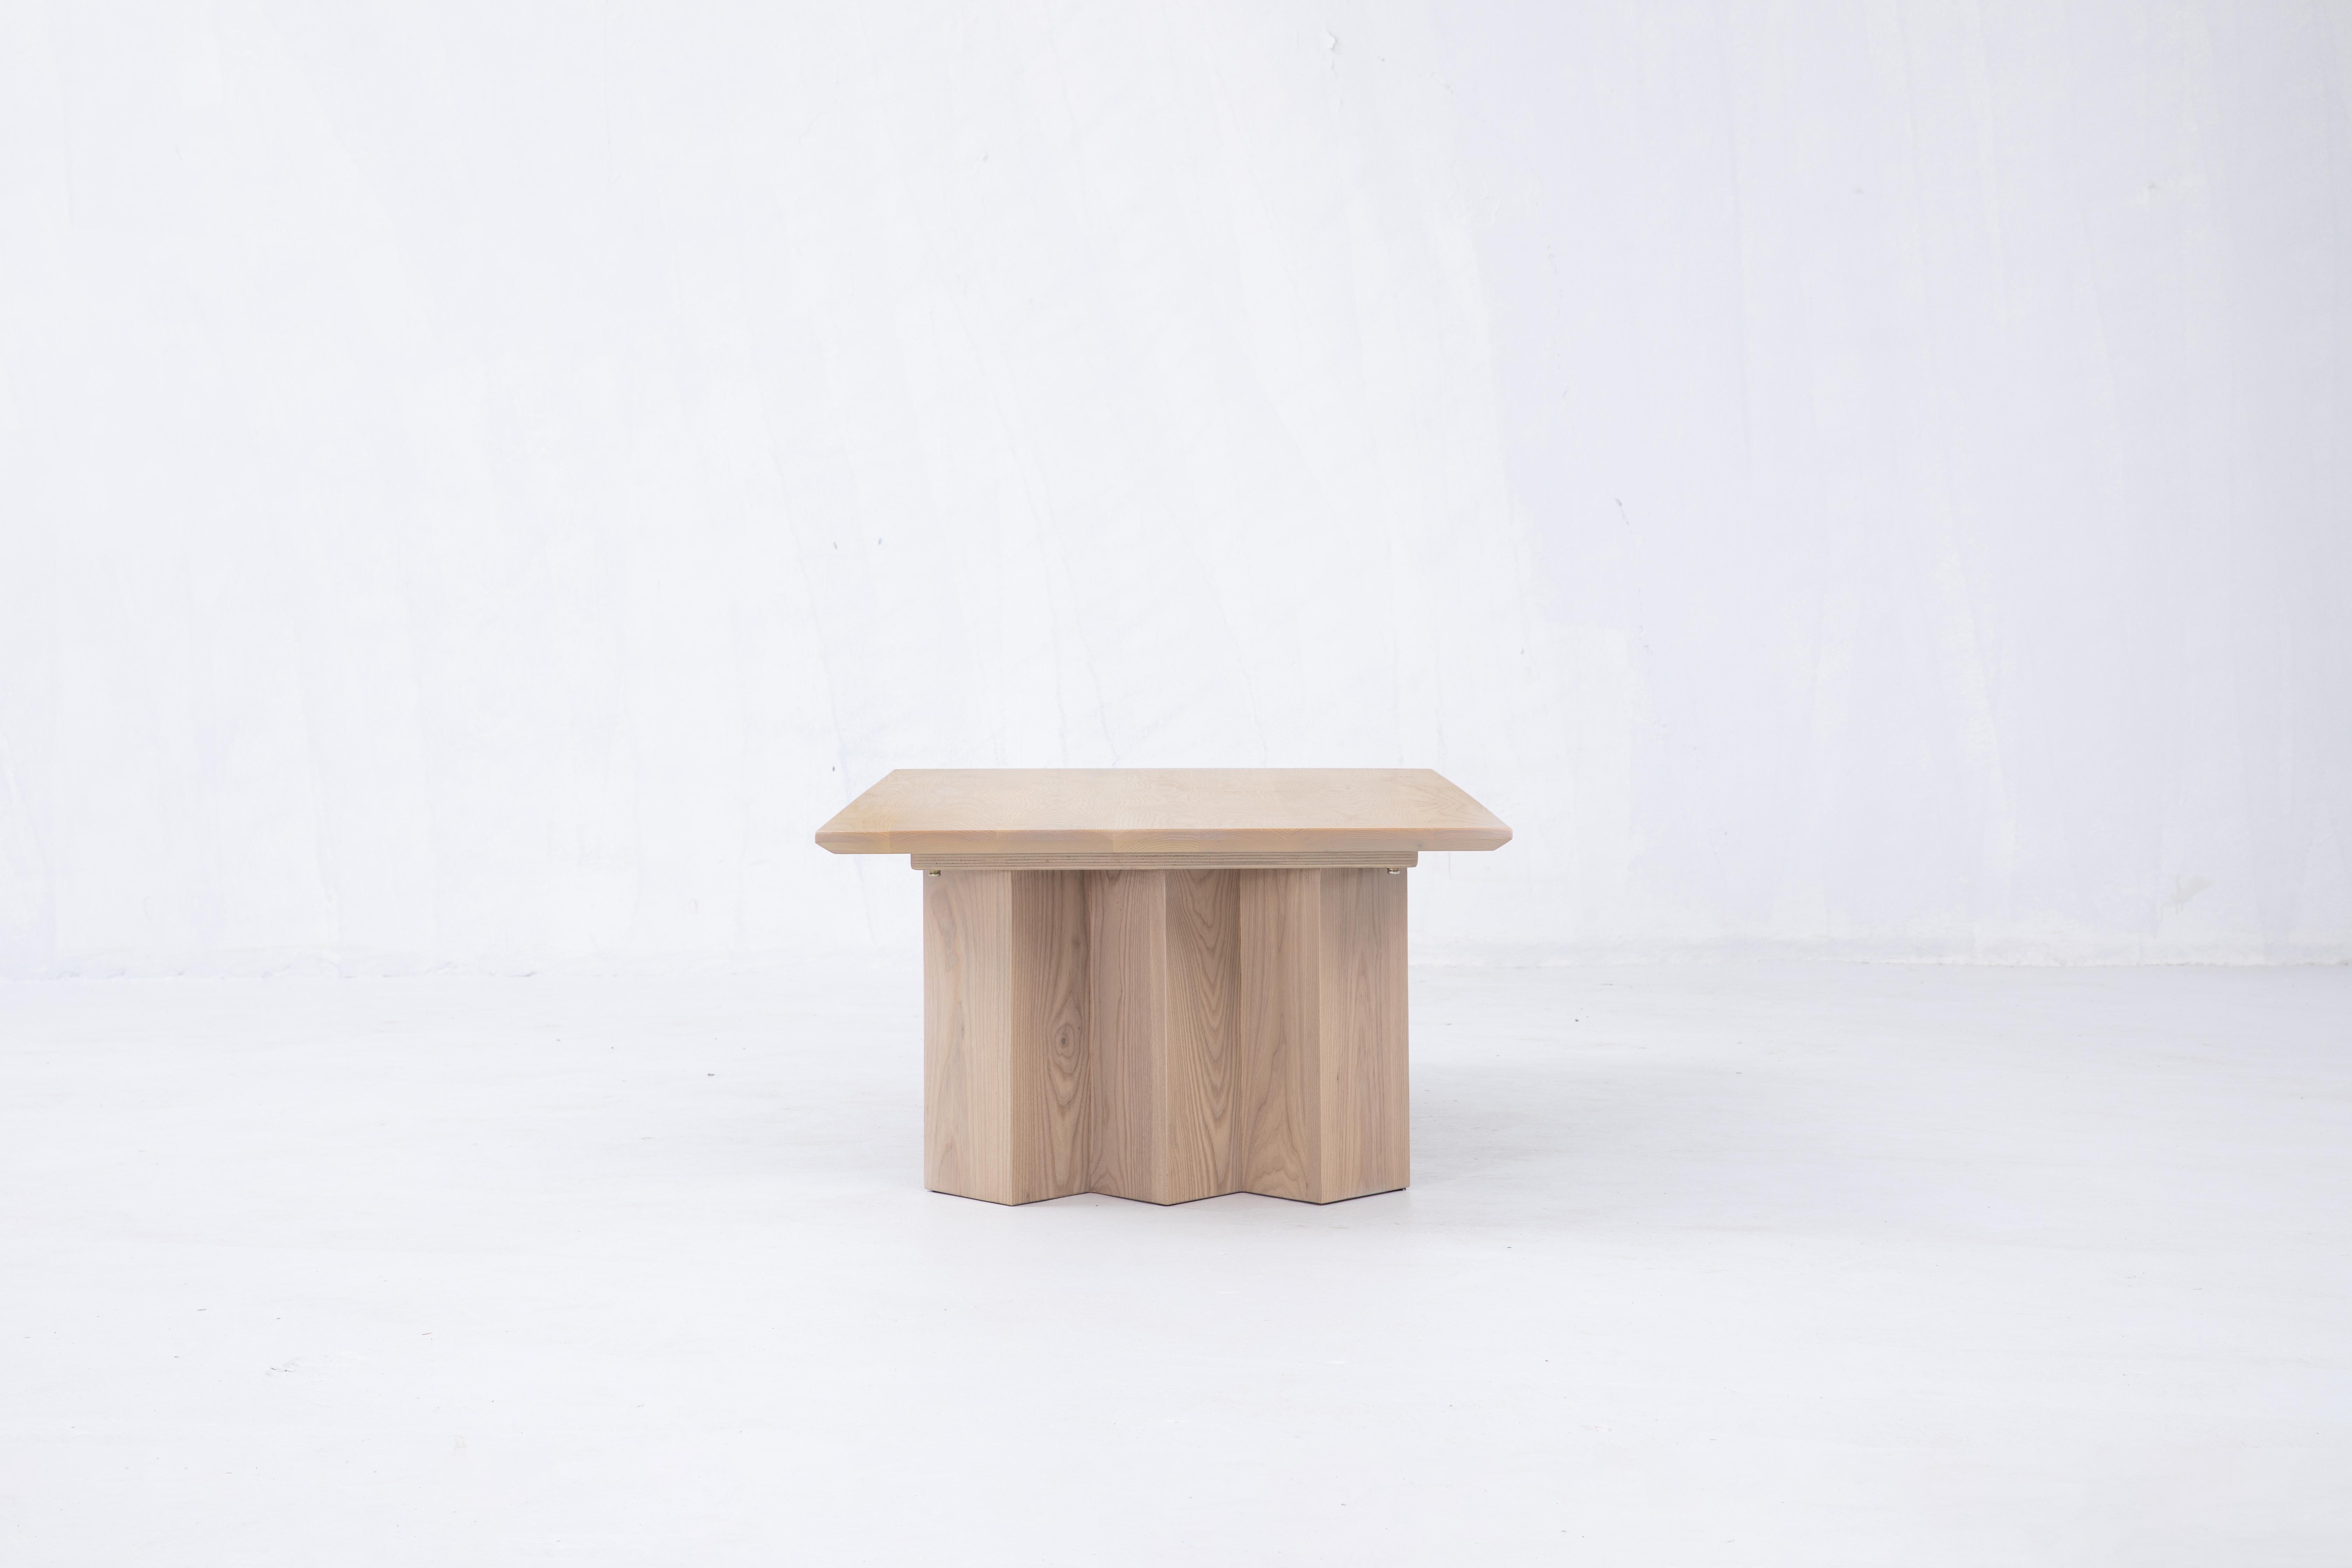 Sun at six is a contemporary furniture design studio that works with traditional Chinese joinery masters to handcraft our pieces using traditional joinery. 

Great furniture begins with quality materials: raw, sustainably sourced white oak, our